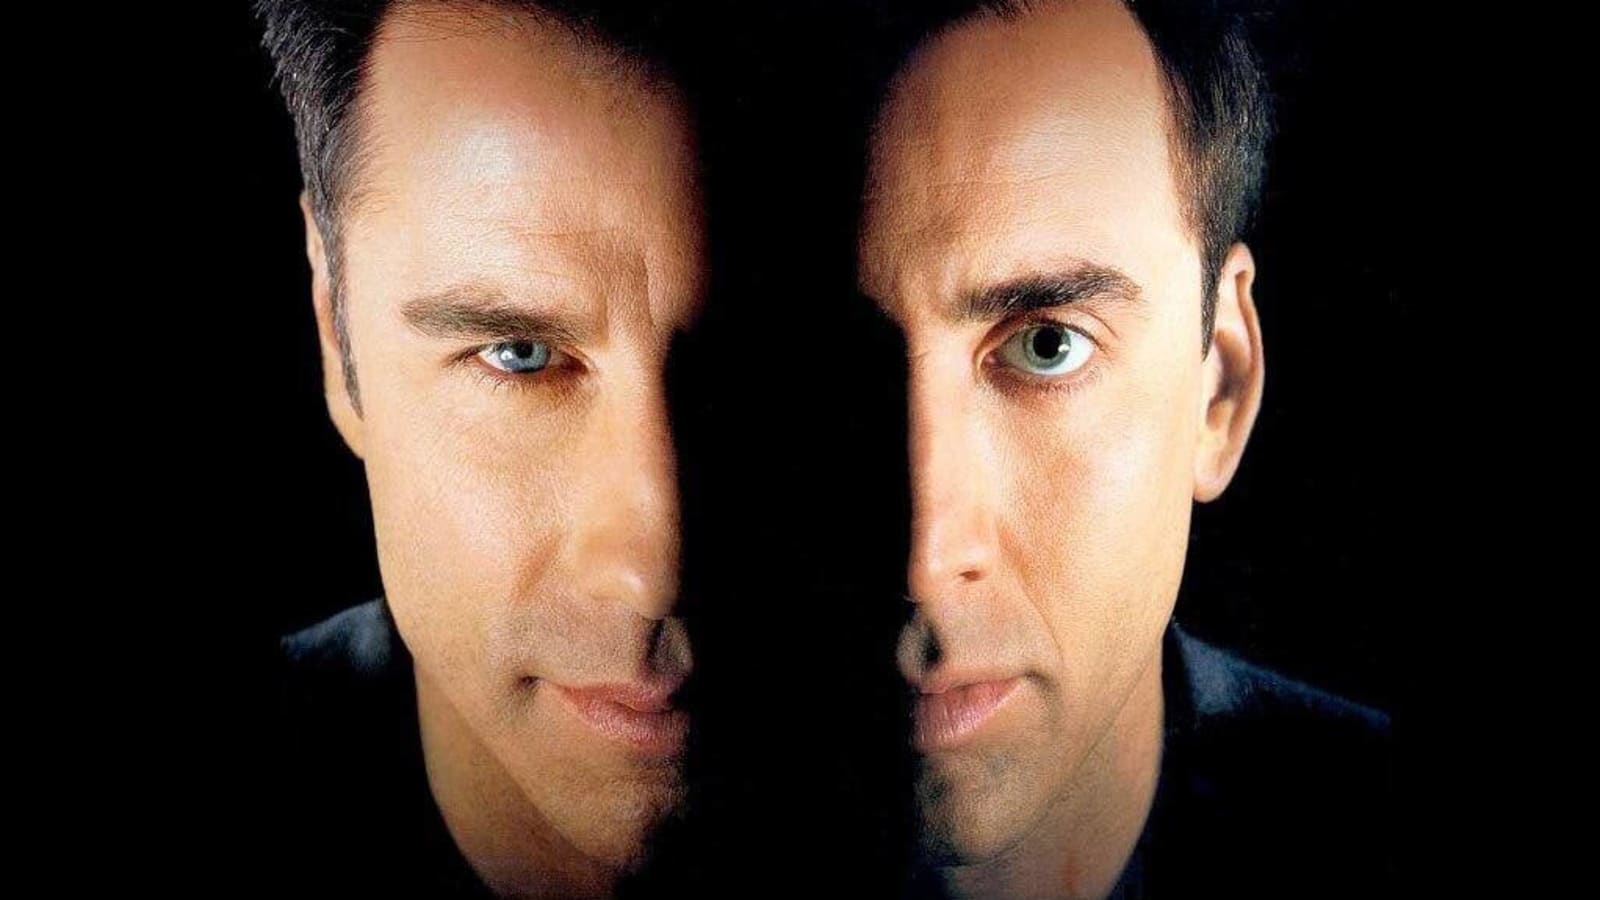 20 facts you might not know about 'Face/Off'